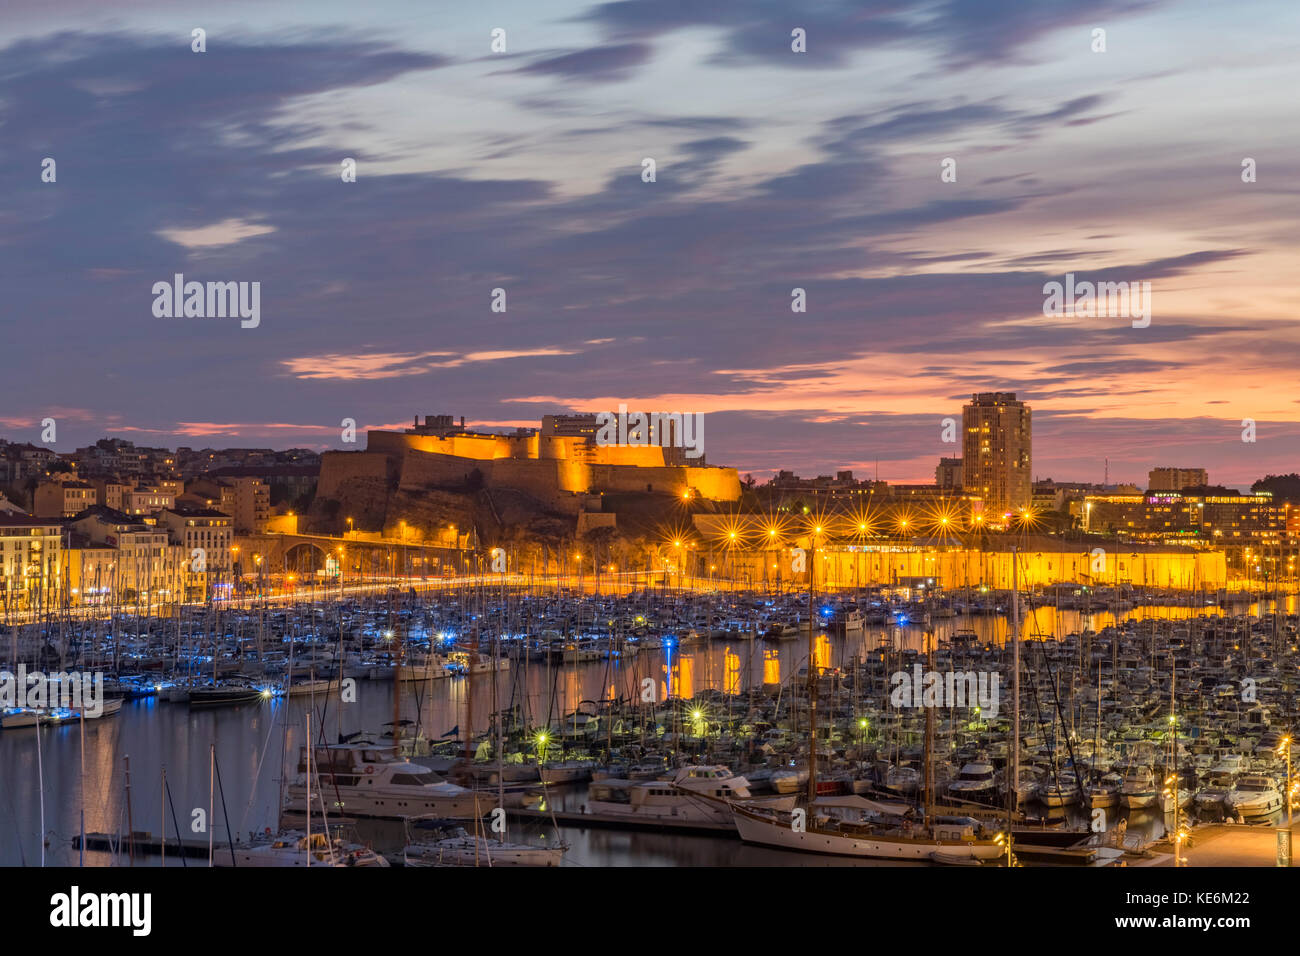 MARSEILLE, FRANCE - OCTOBER 02, 2017: Evening view of the old port of Marseille and Fort Saint-Nicolas Stock Photo